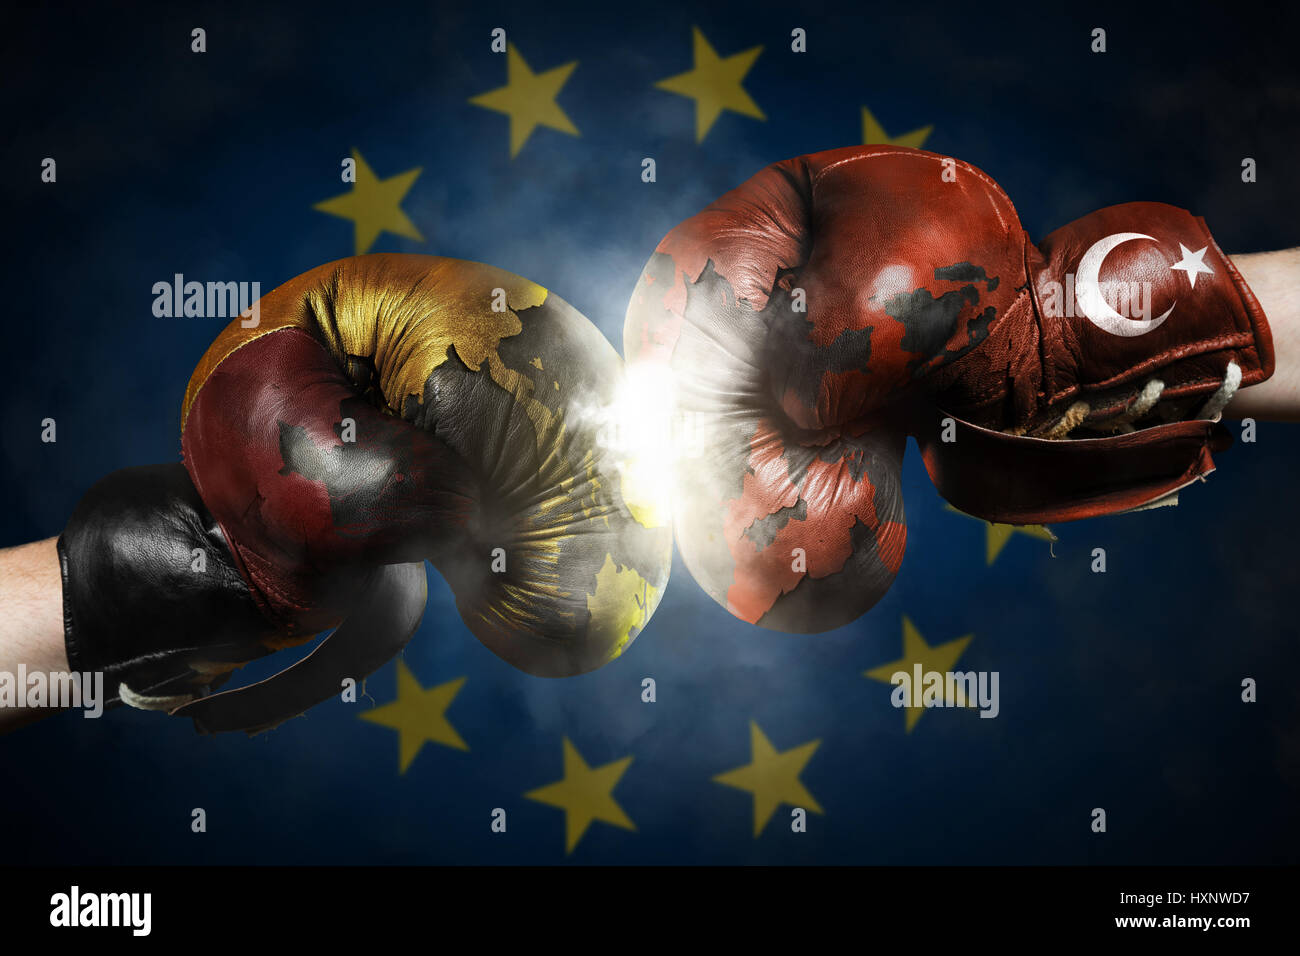 Political Crisis between Turkey and Germany symbolized with Boxing Gloves Stock Photo